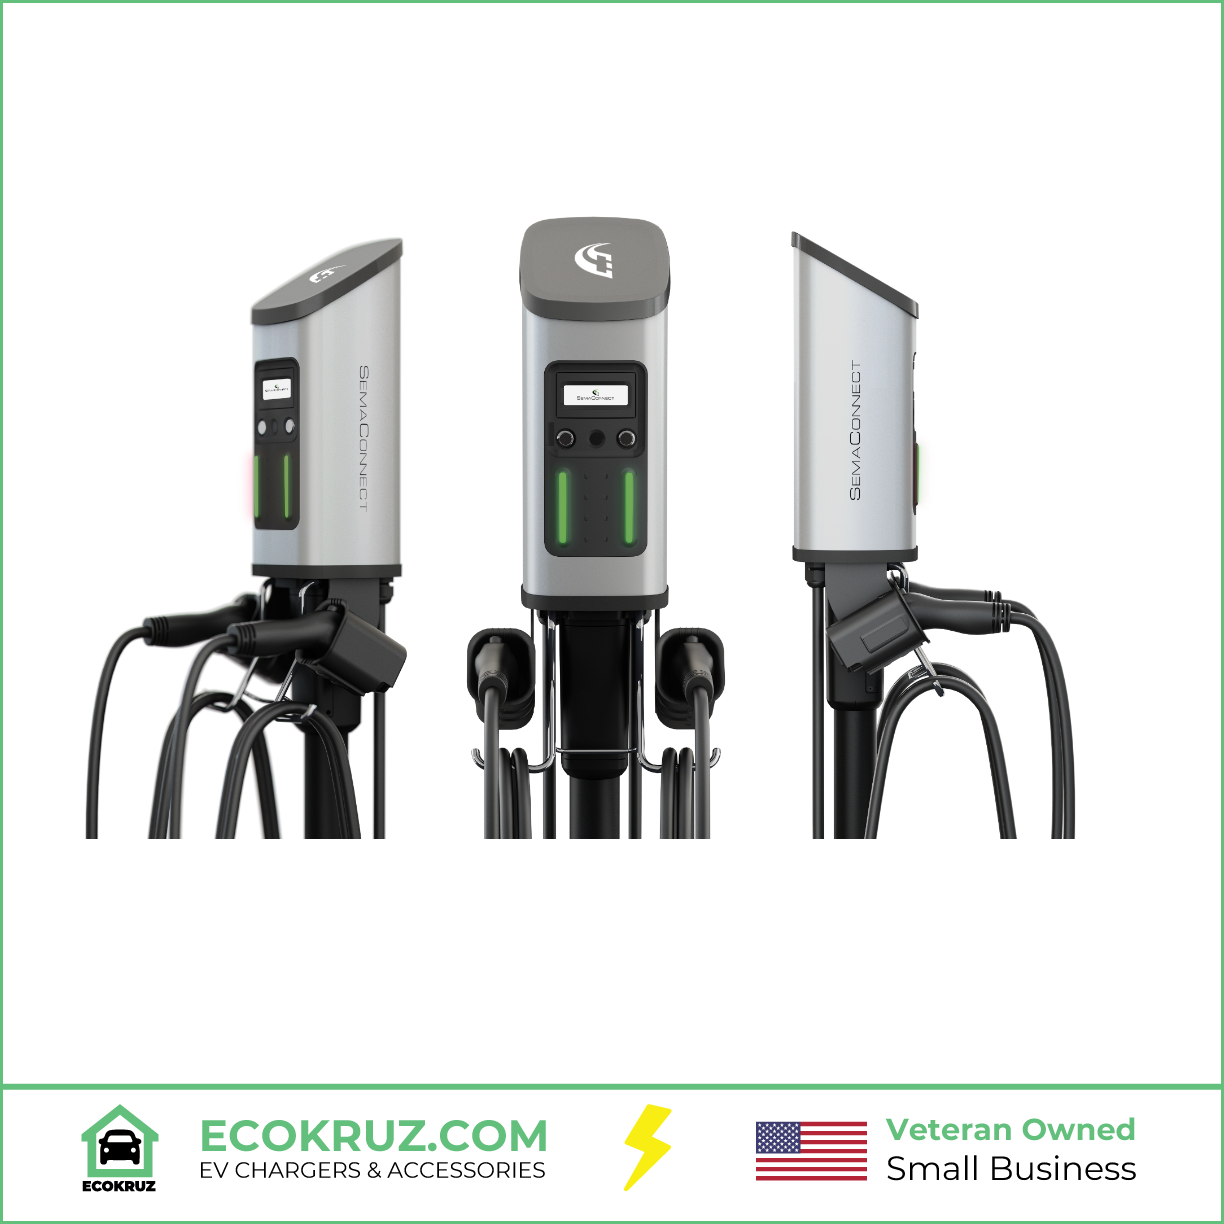 BLINK Series 7 Level 2 Commercial Smart EV Charging Station w/ One Year Full Service (with Pedestal) 48A or 80A